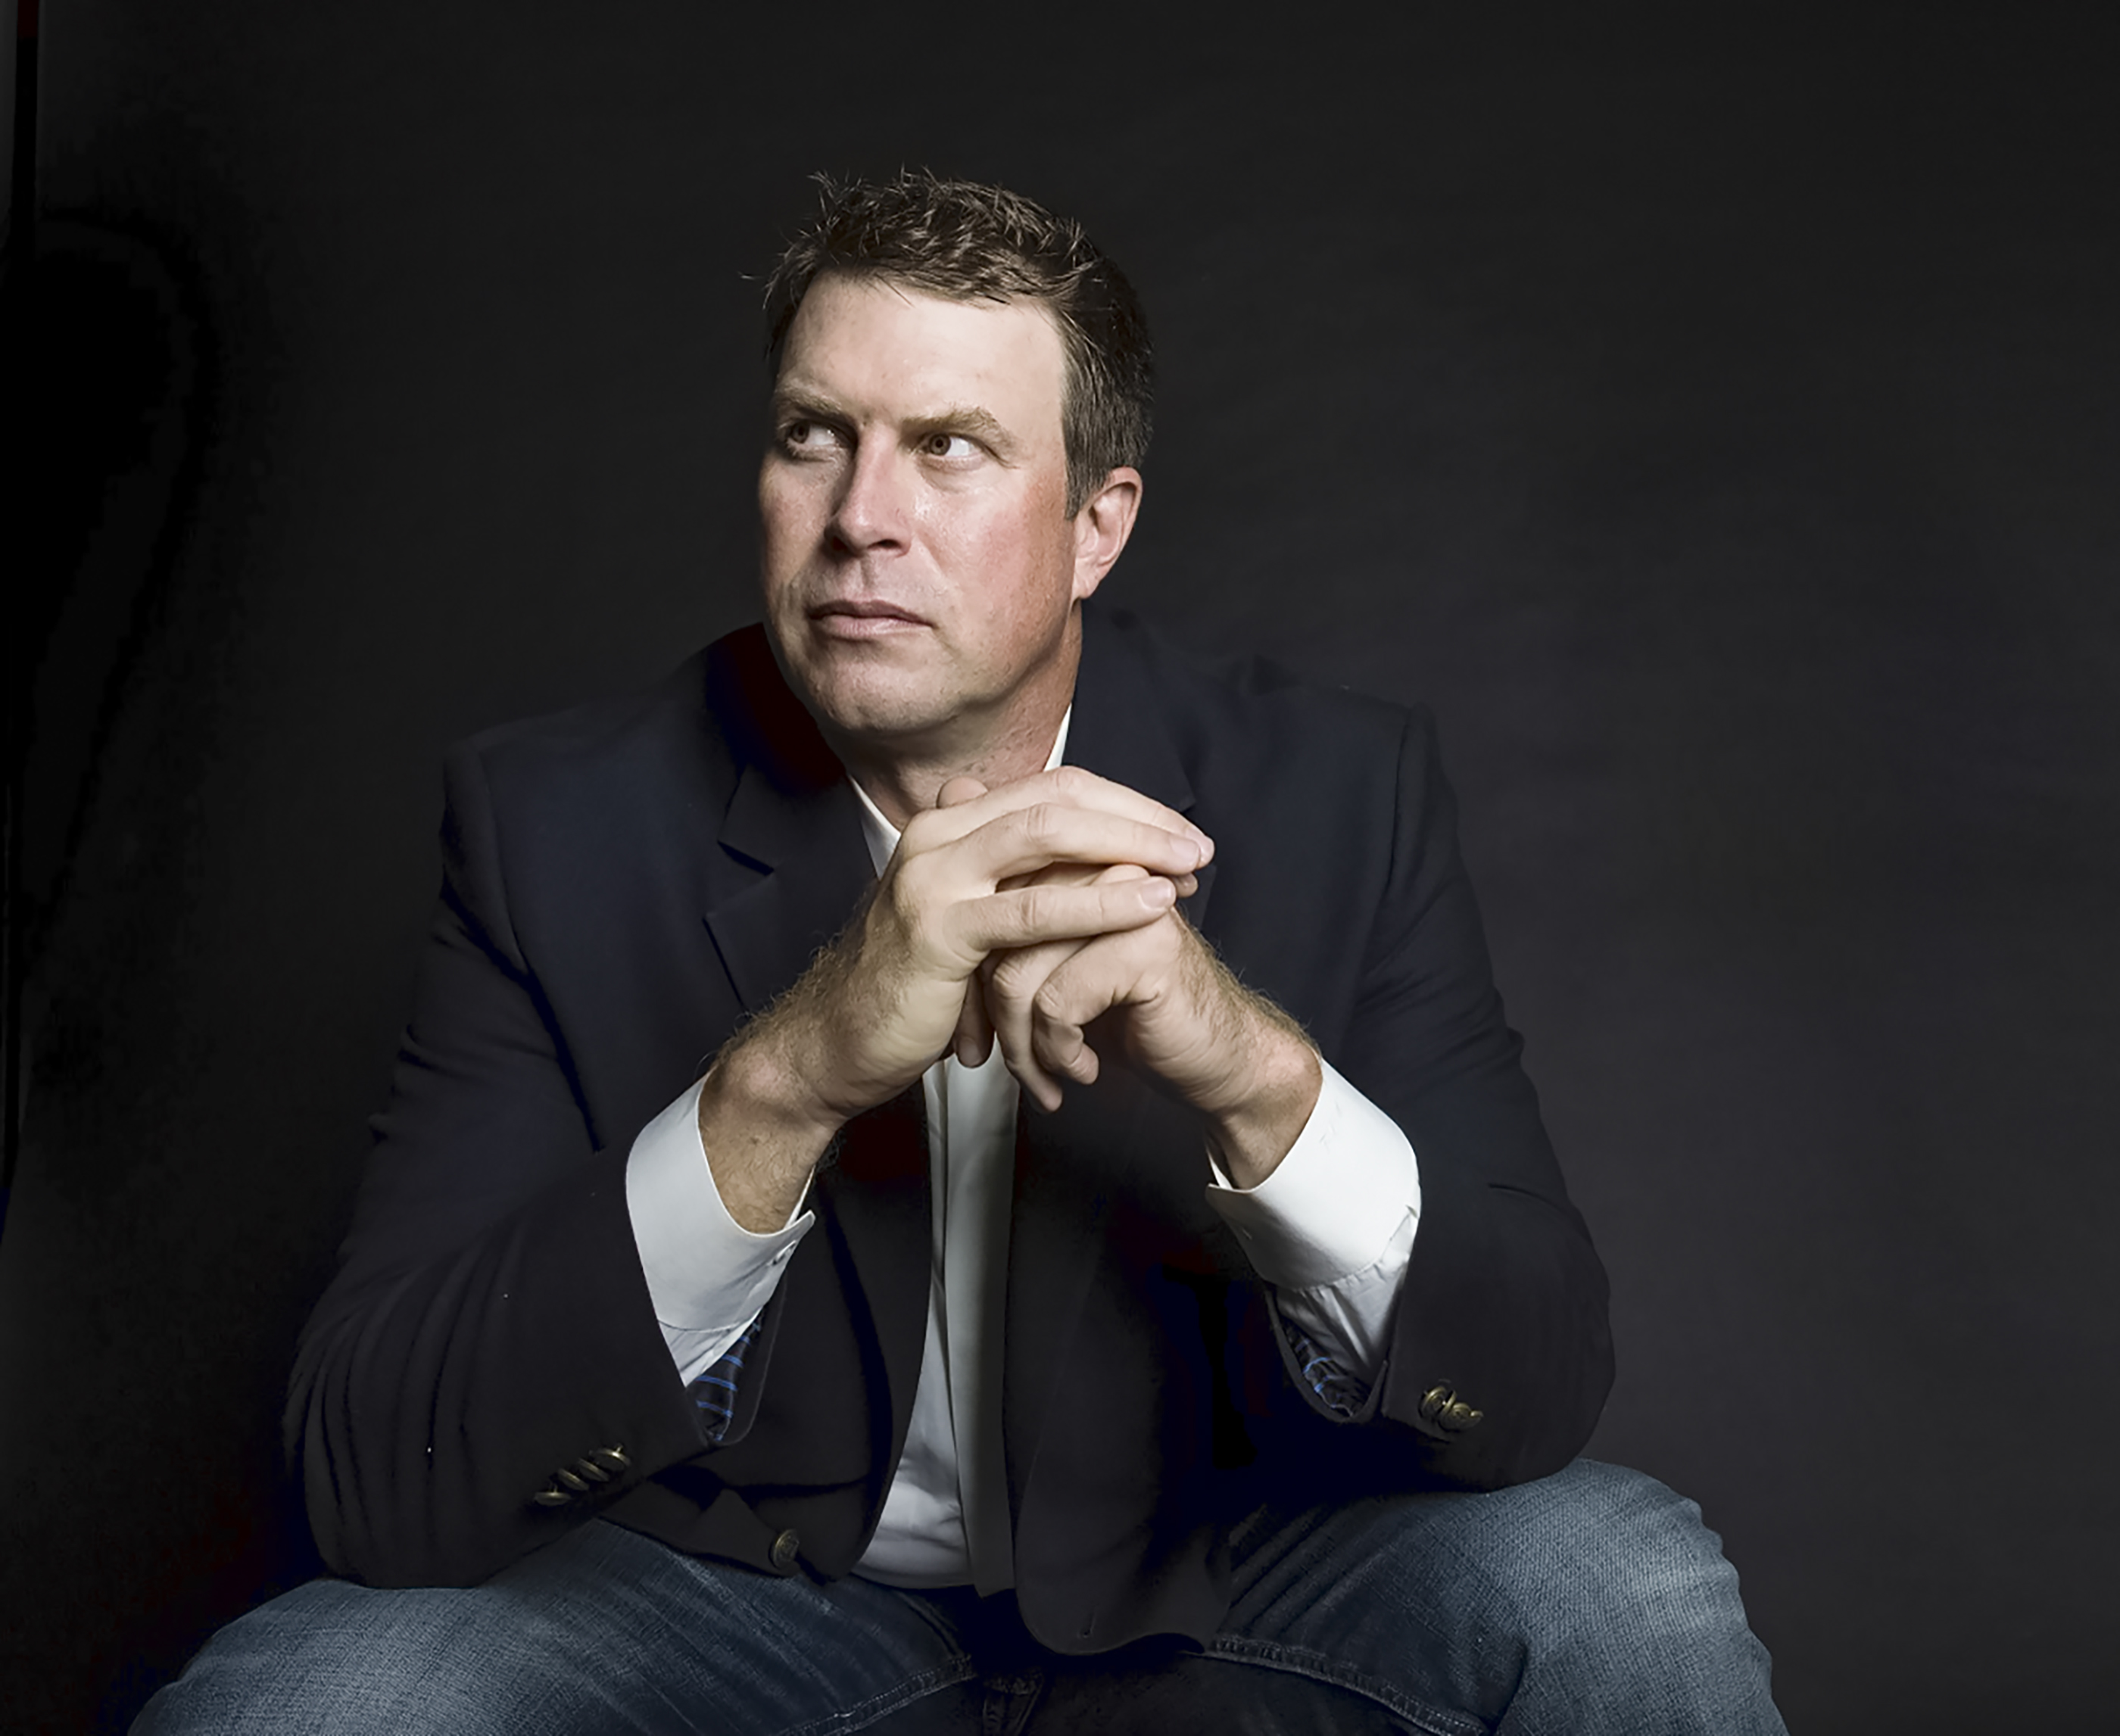 Ryan Leaf to Speak at Recovery and Intervention Services Event